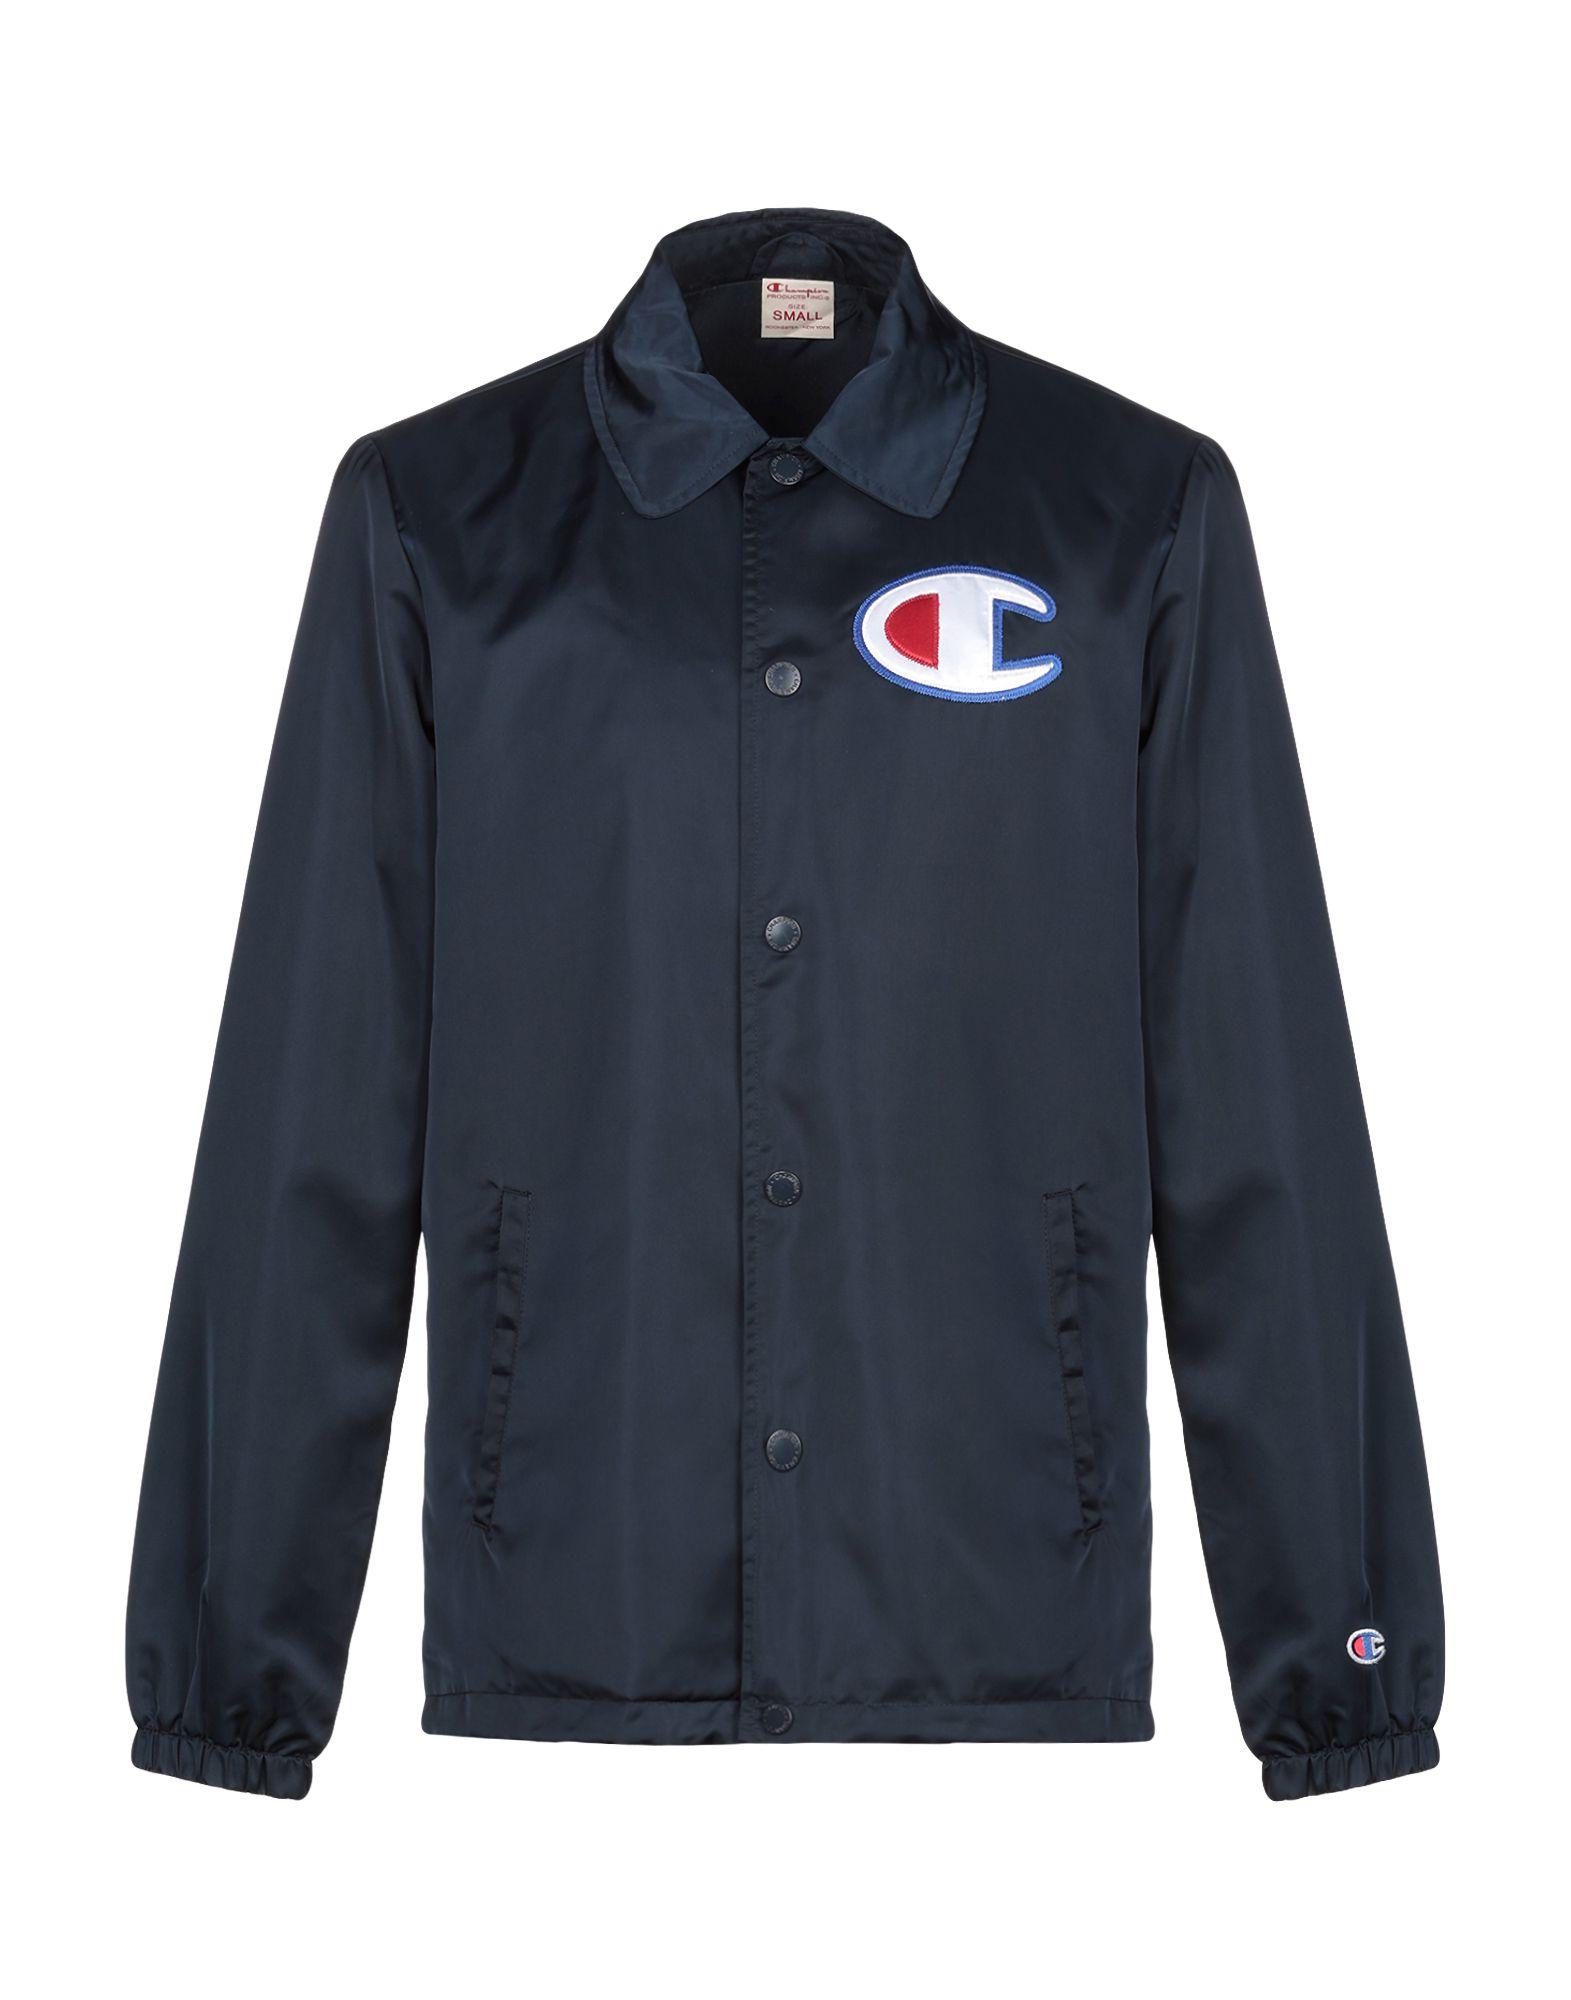 Champion Synthetic Jacket in Dark Blue (Blue) for Men - Lyst